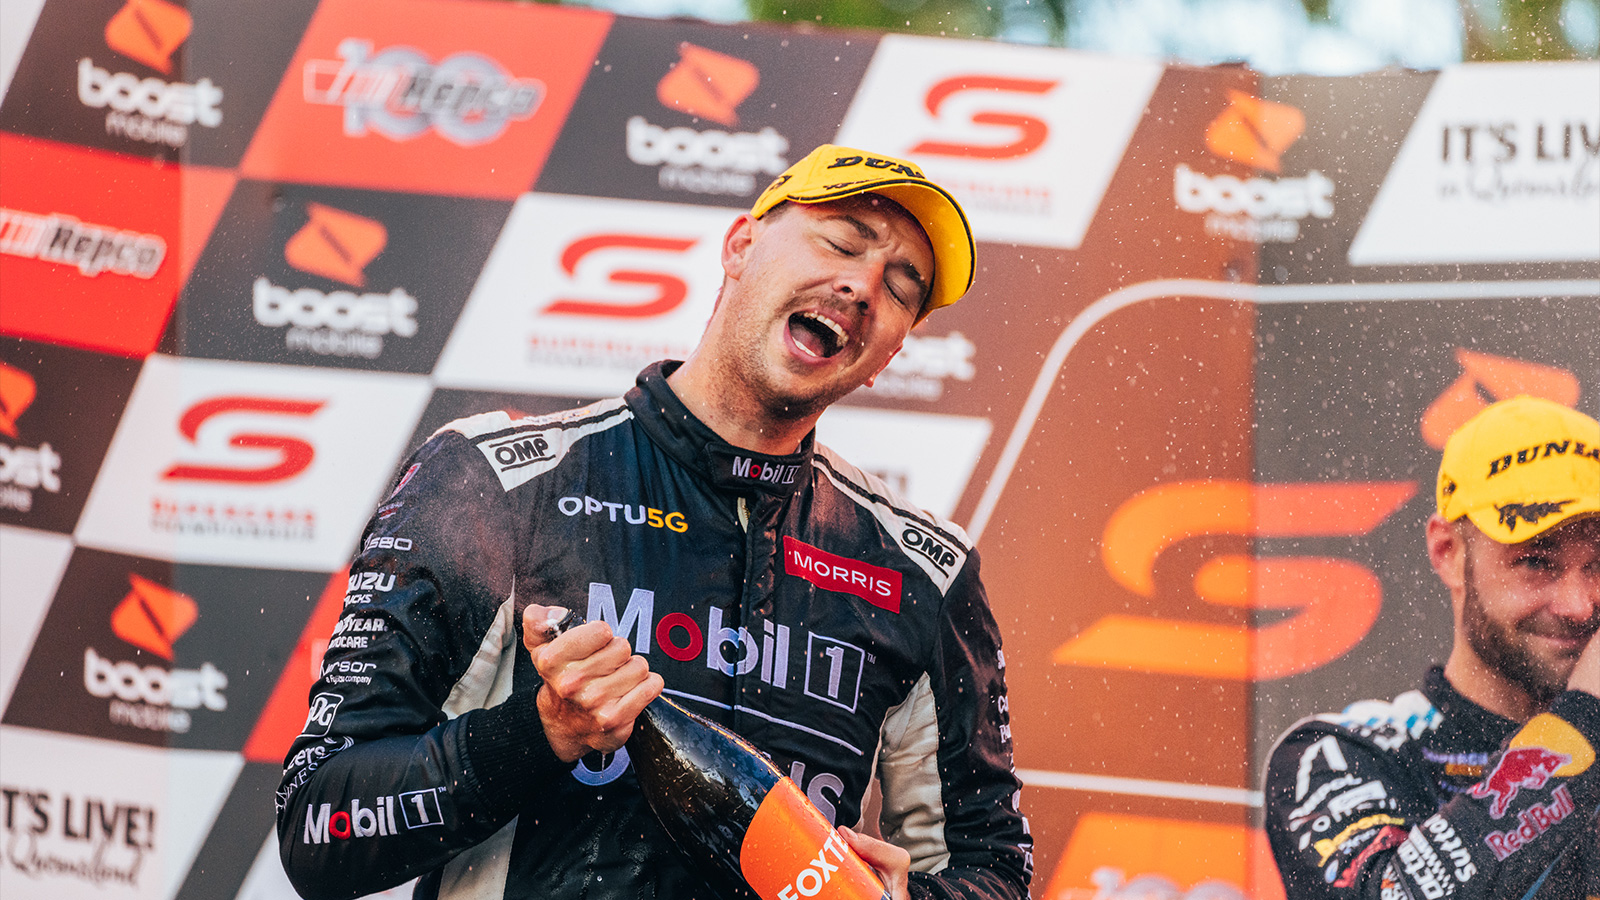 Double Podium for Mostert in Surfers